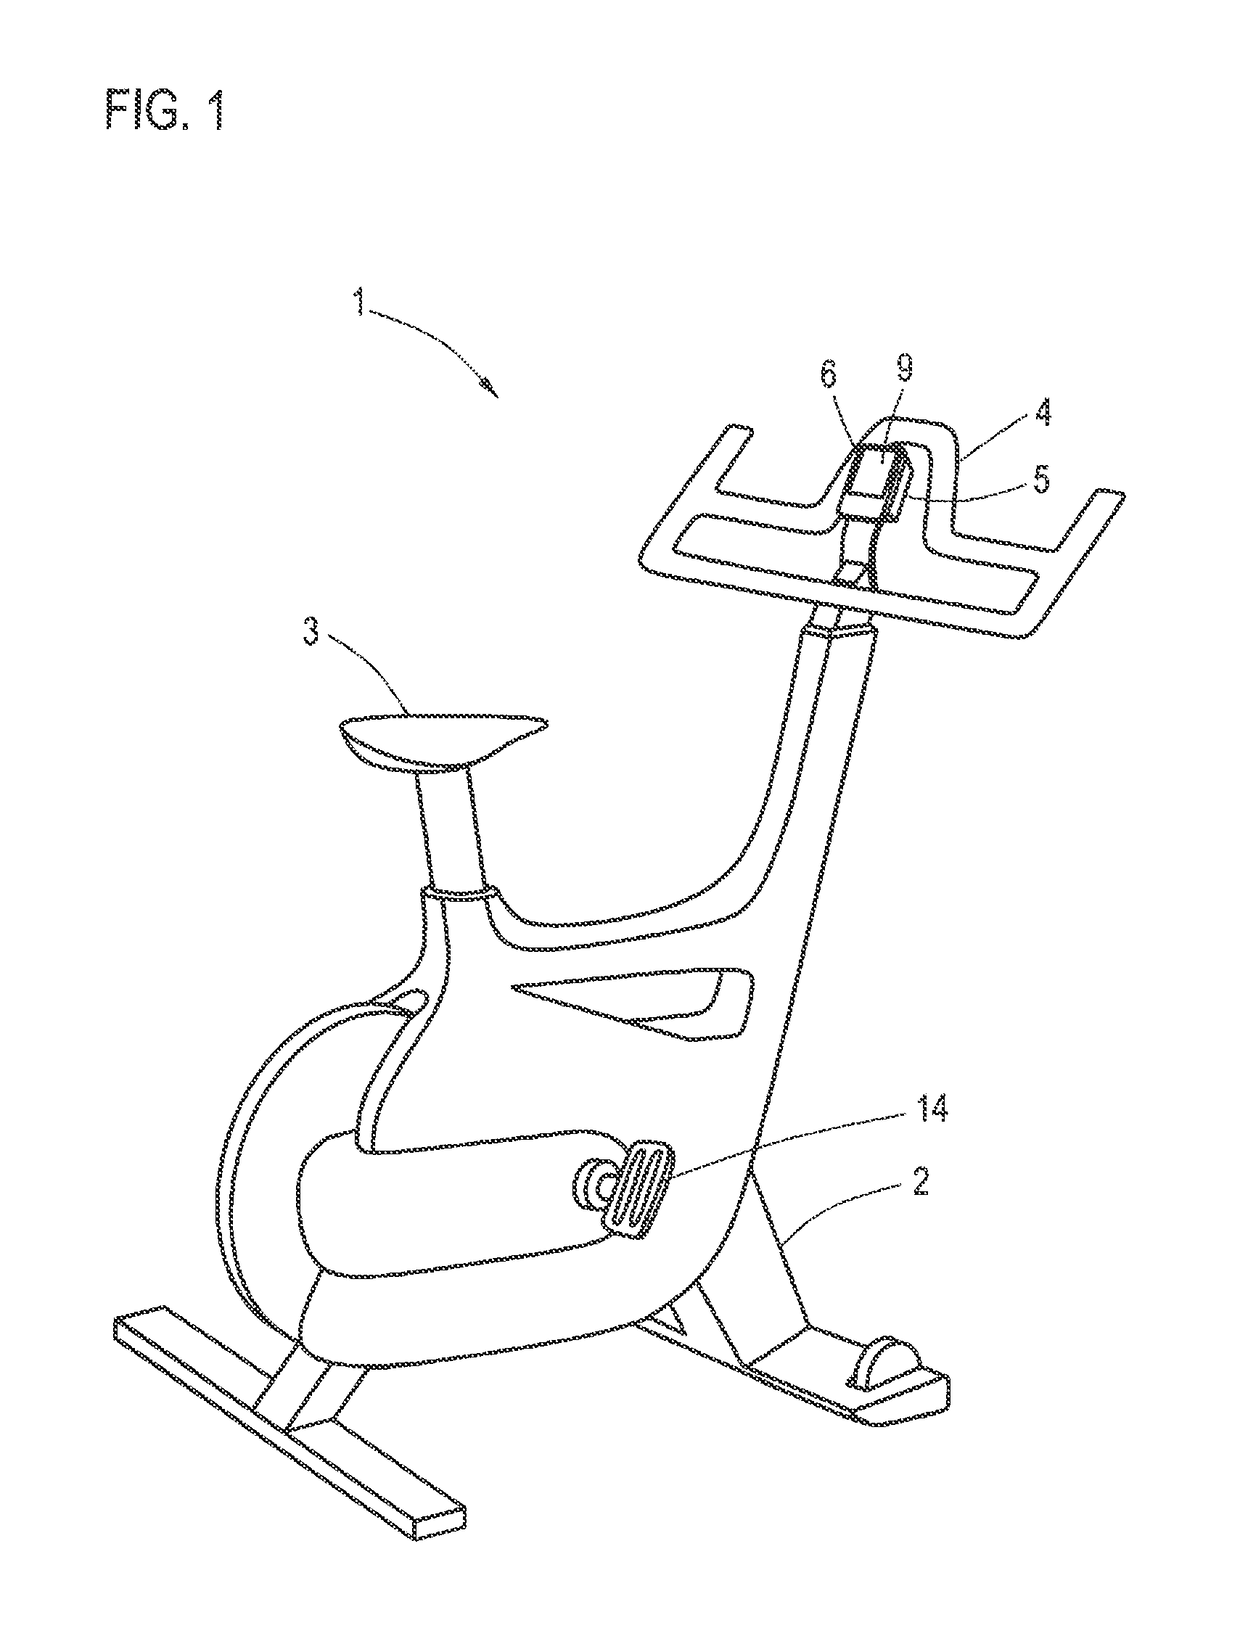 Stationary exercise equipment for physical training, more particular an exercise bike